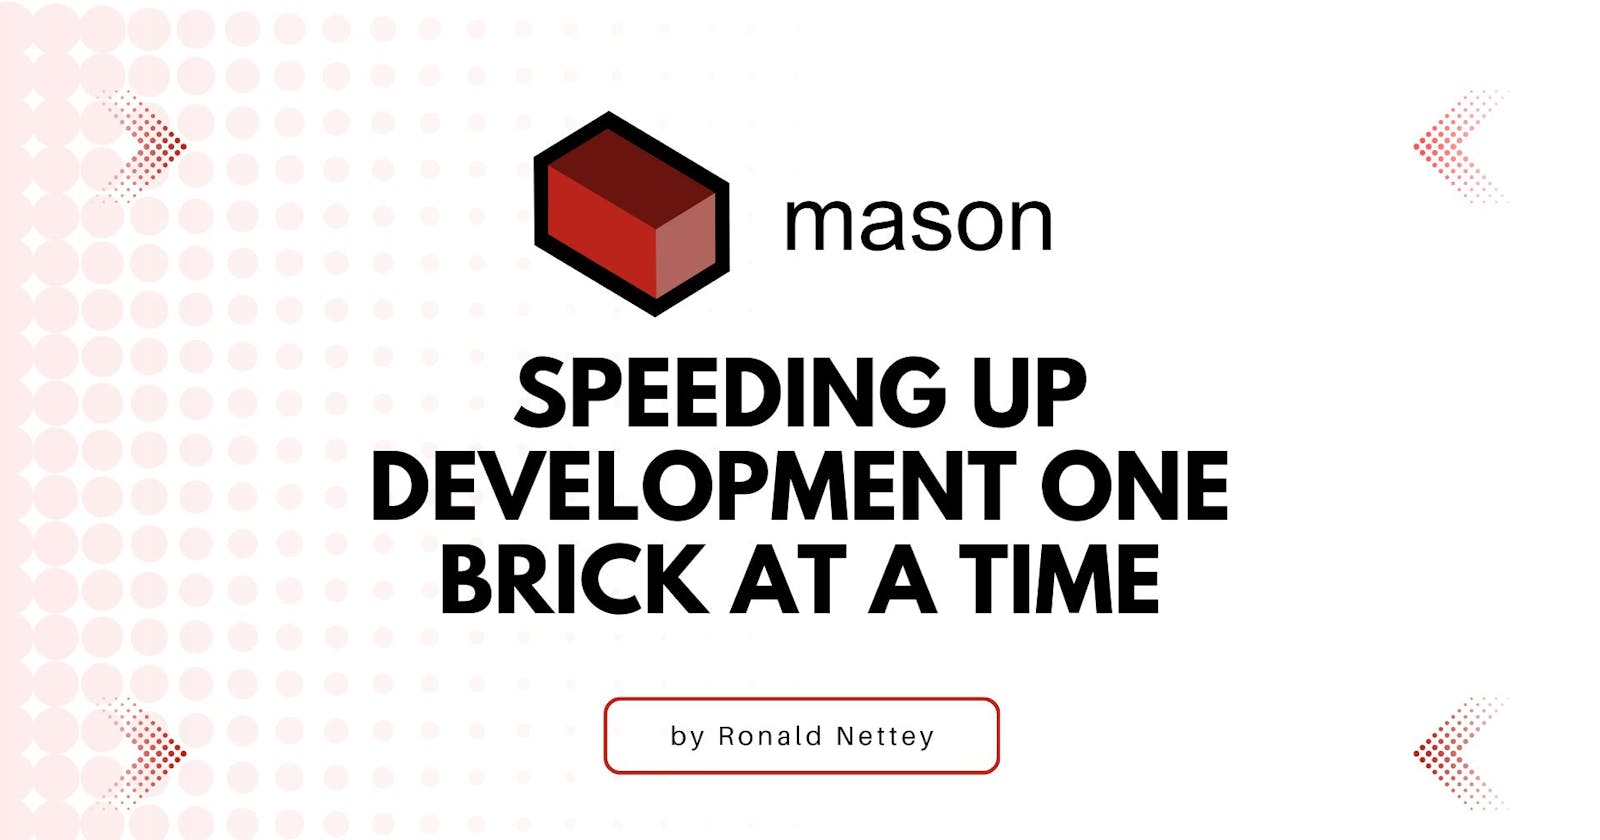 Mason: Building With Speed One Brick At A Time